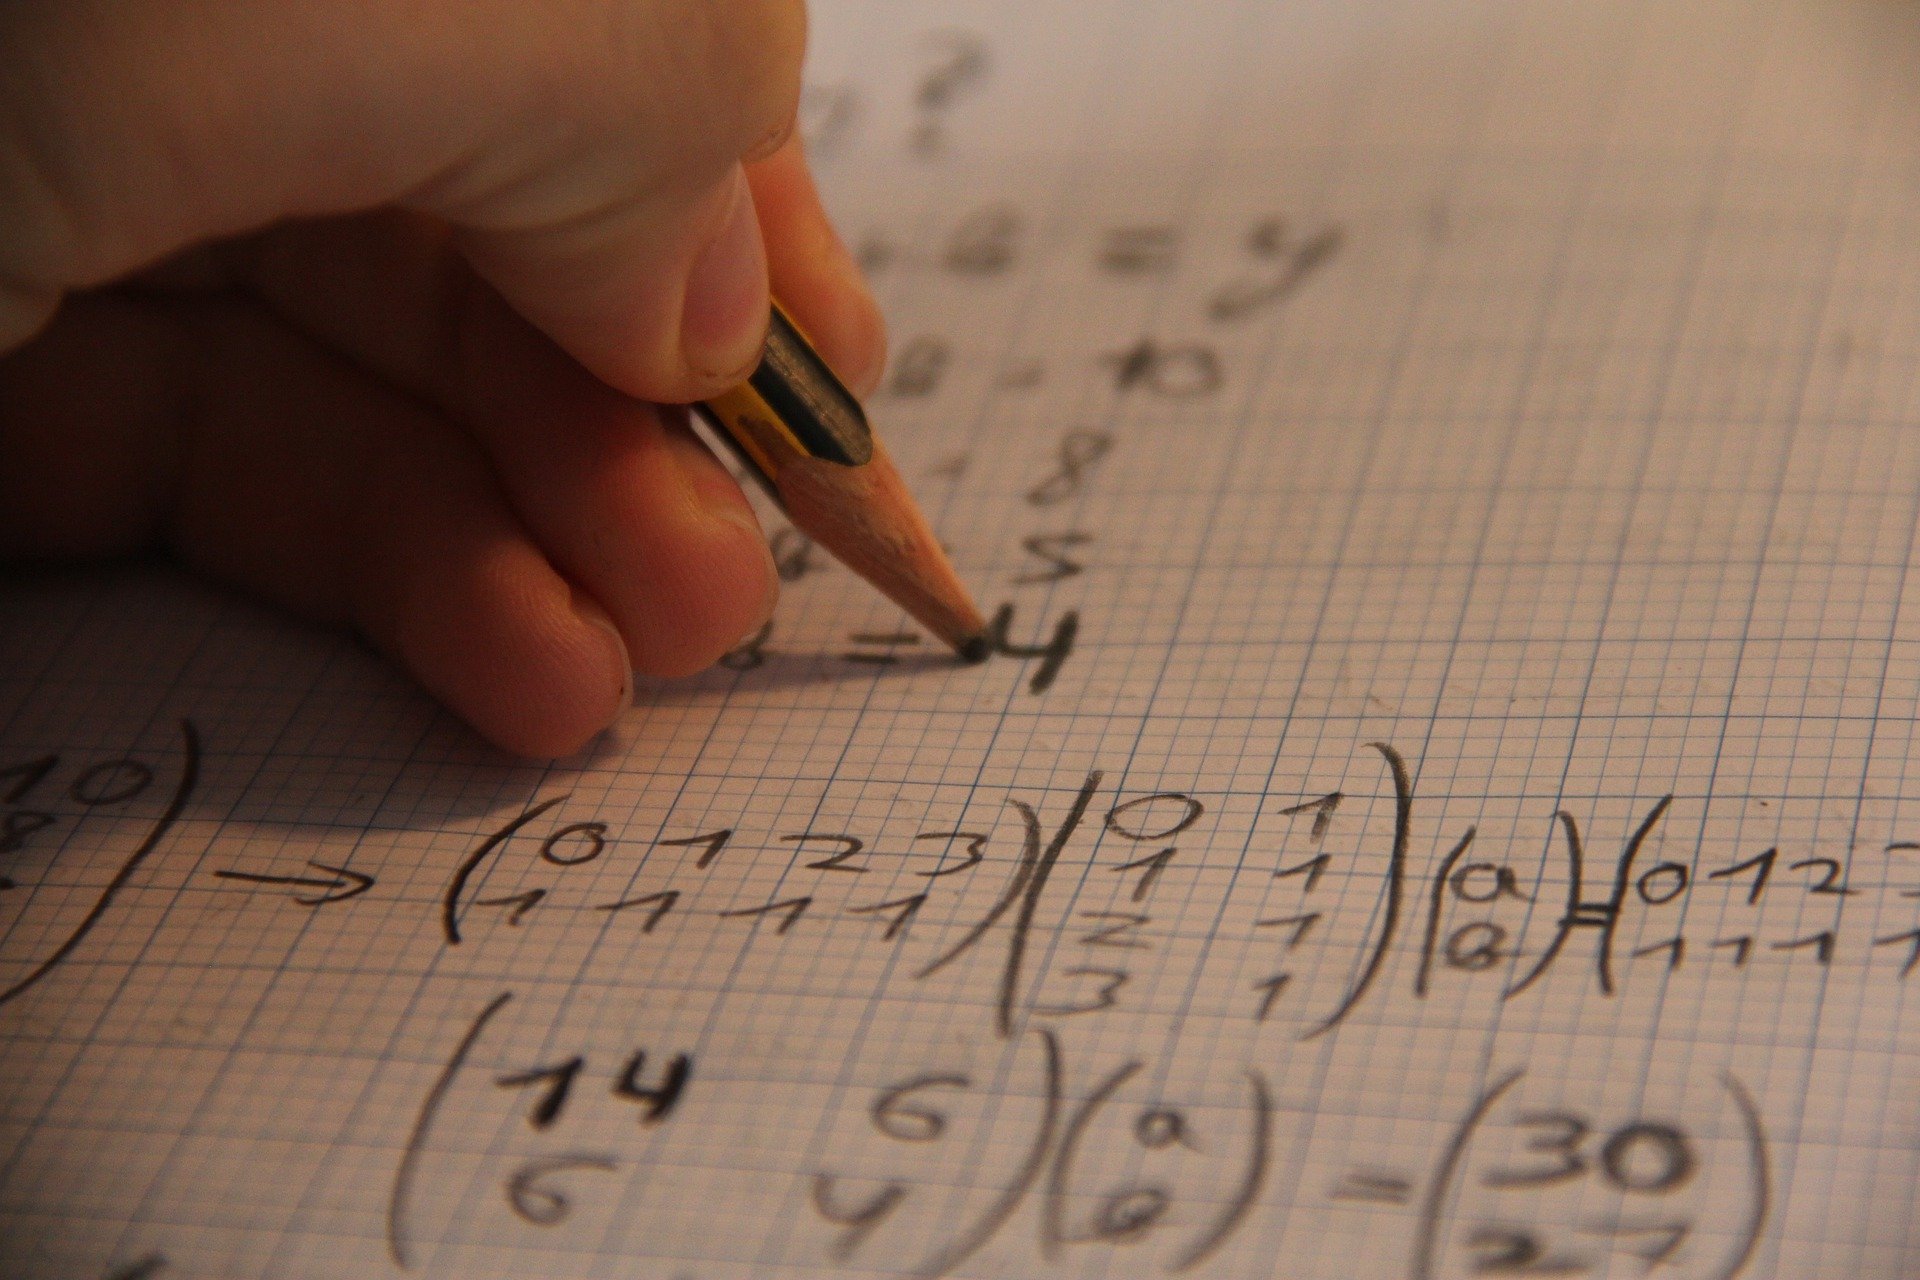 An algorithm predicts what students will drop out of math courses